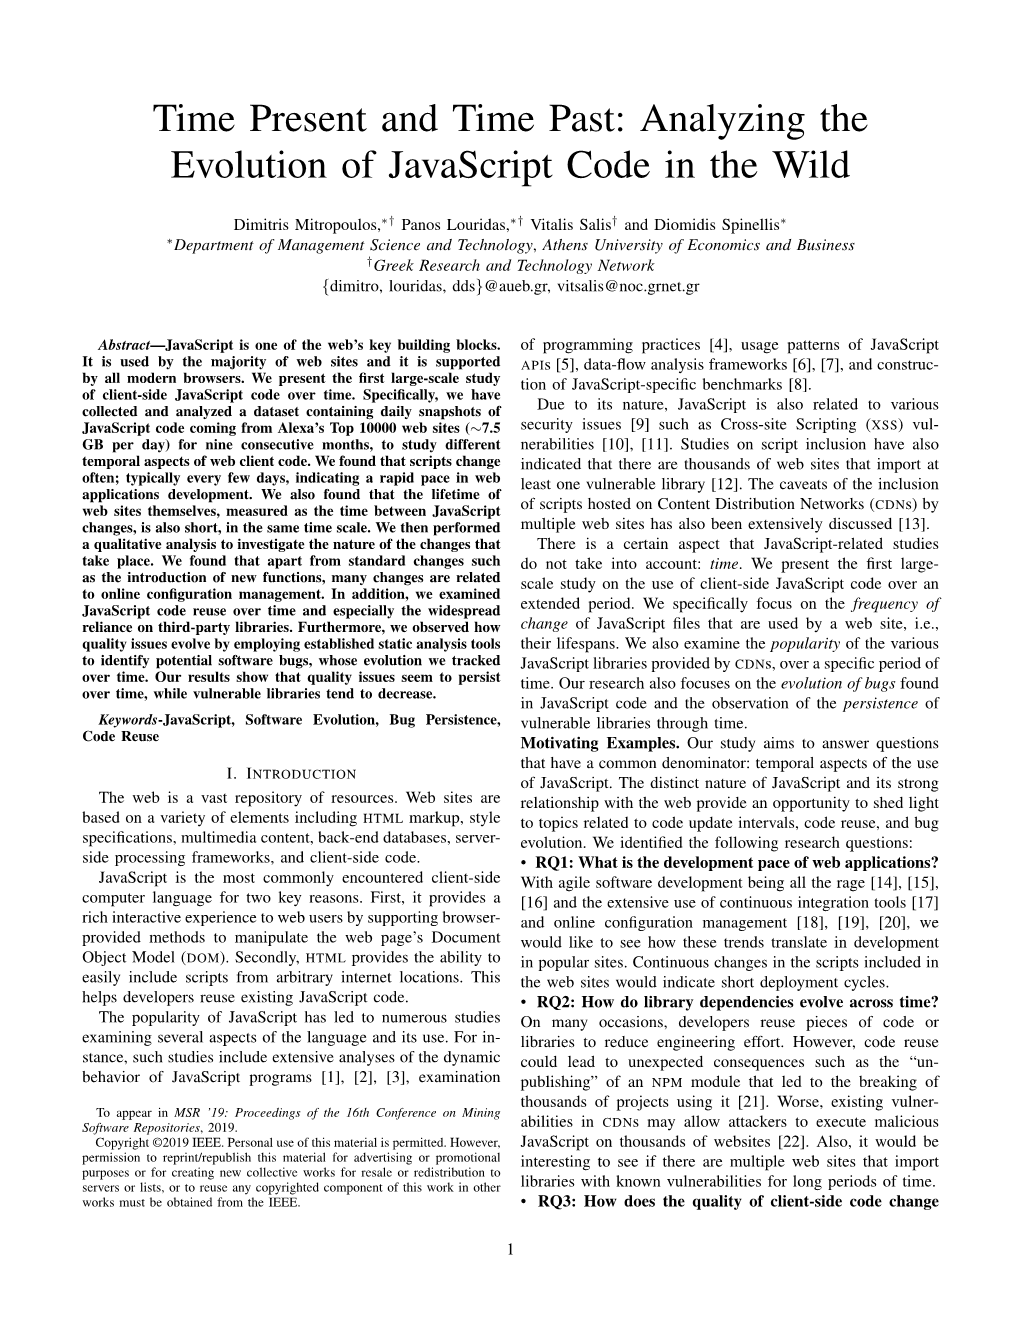 Analyzing the Evolution of Javascript Code in the Wild